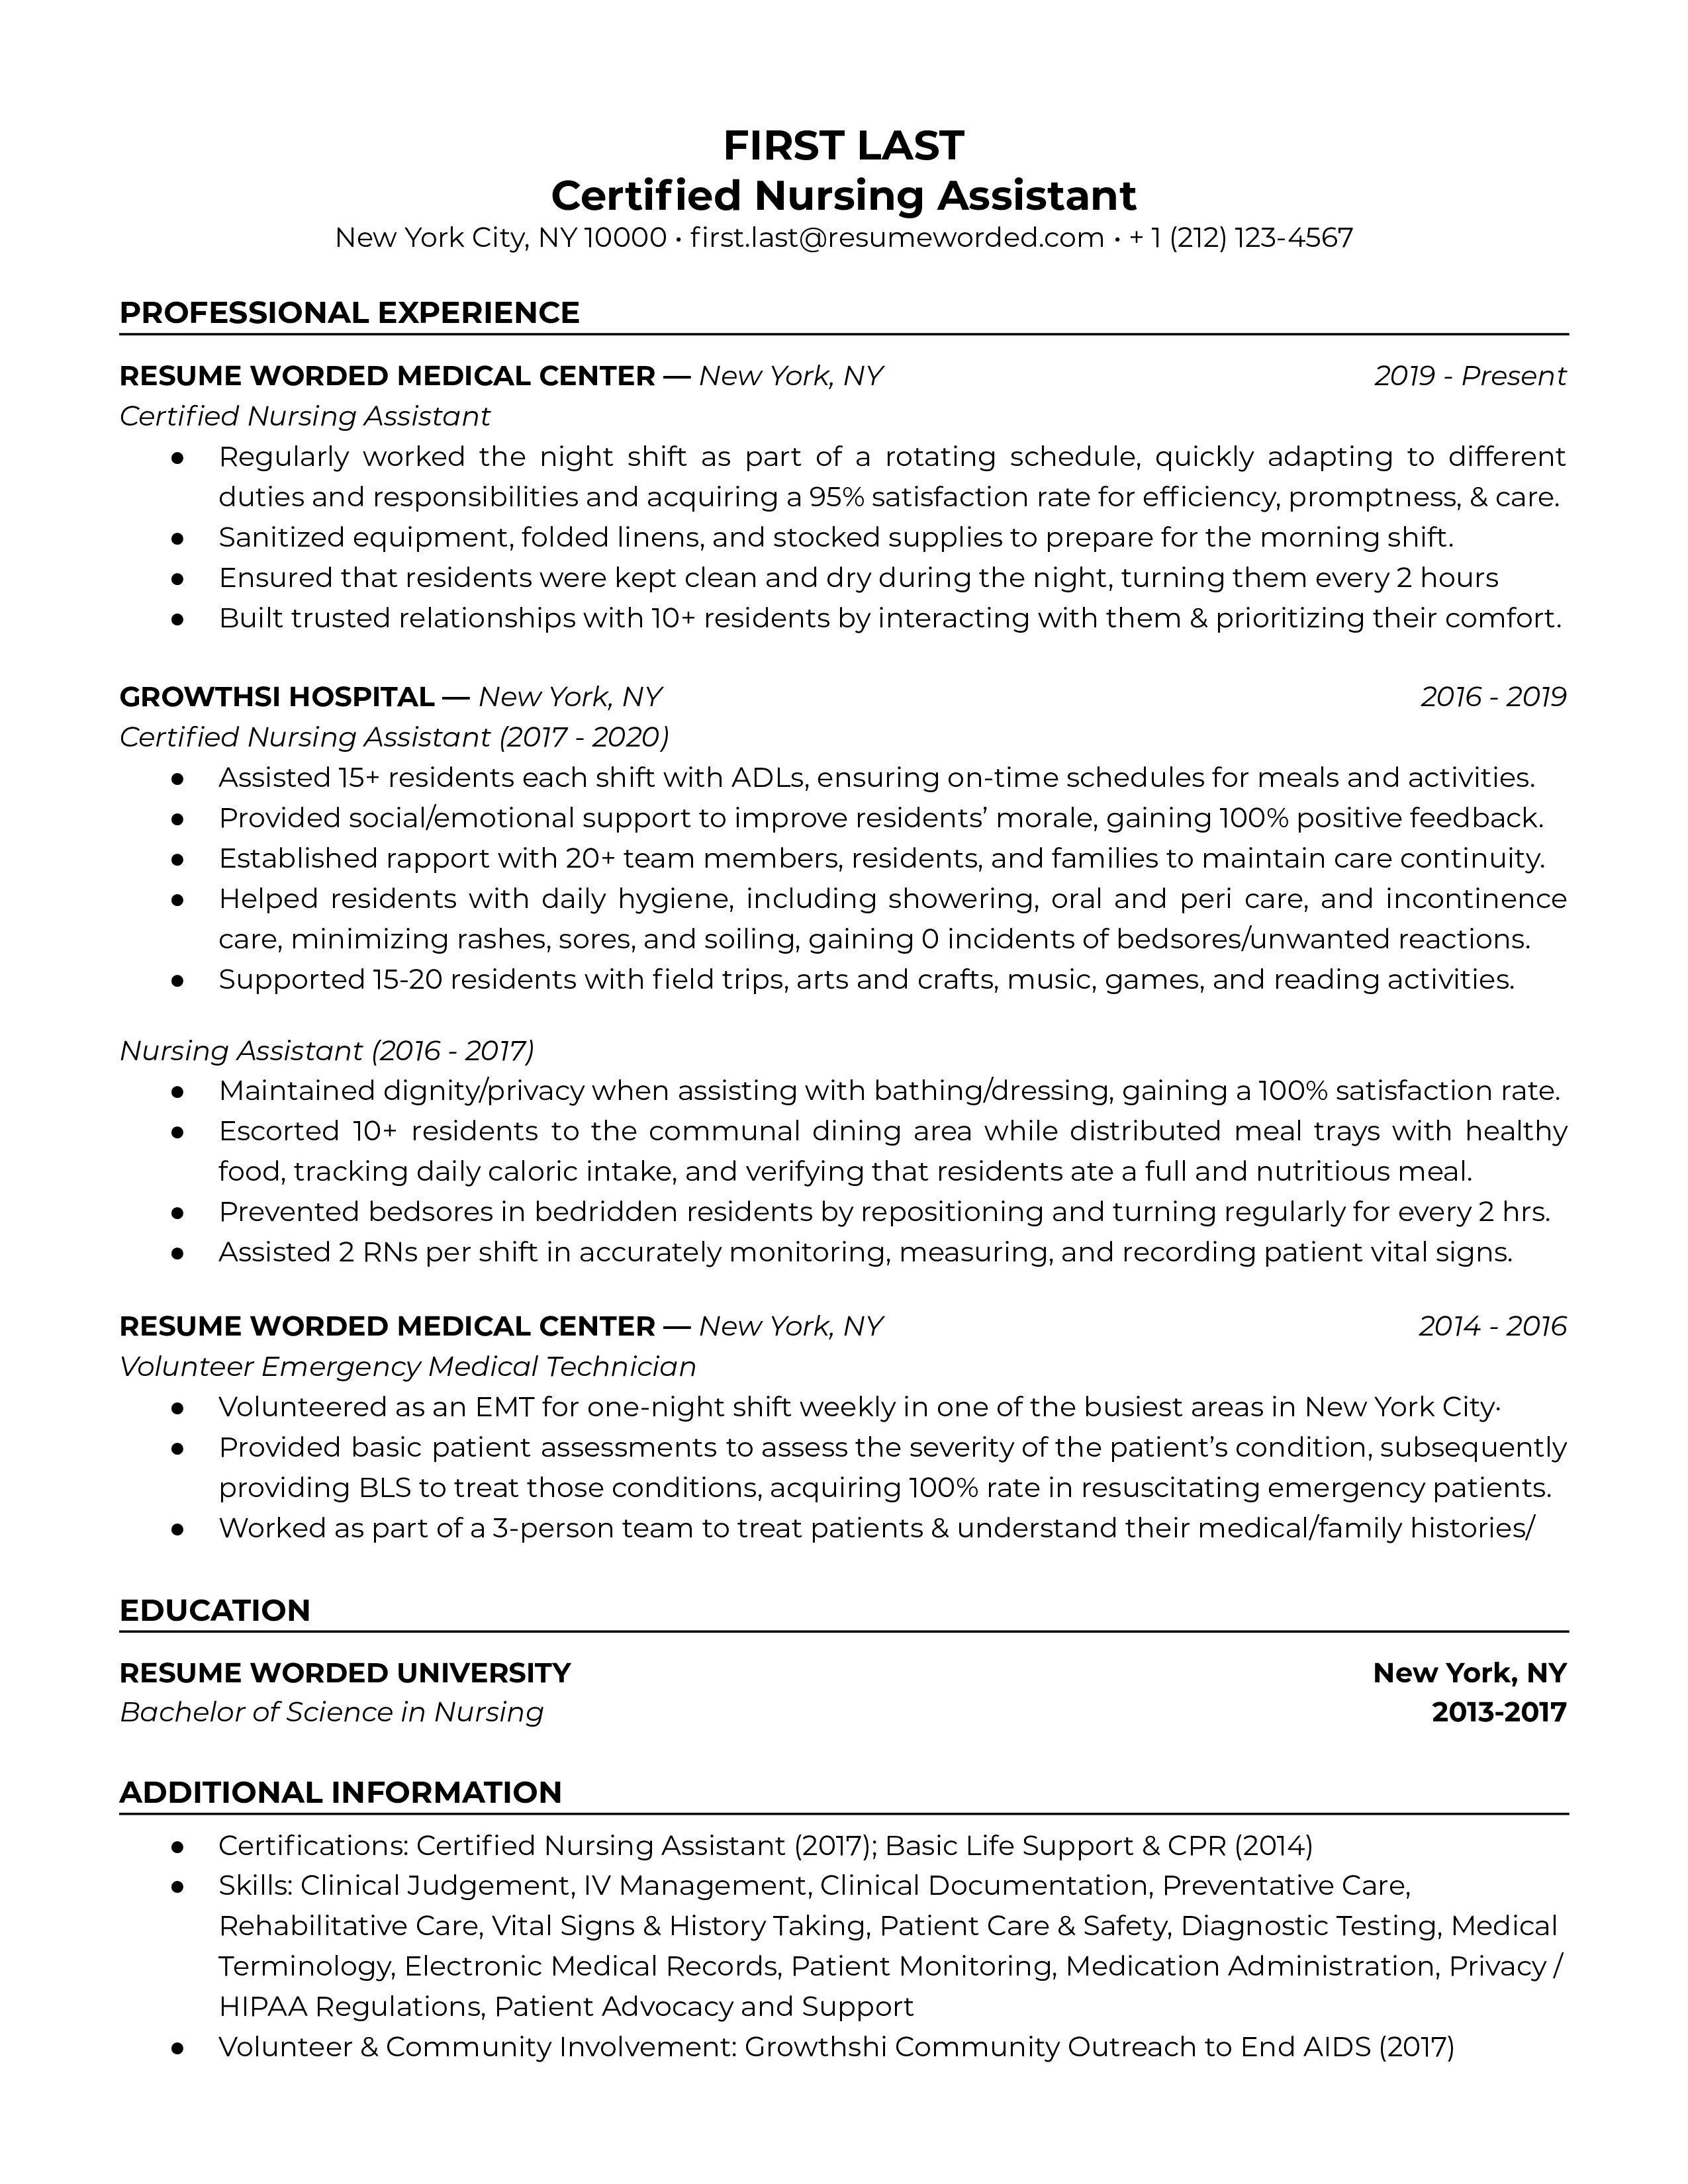 Screenshot of a Certified Nursing Assistant's resume with focus on skills and certifications.